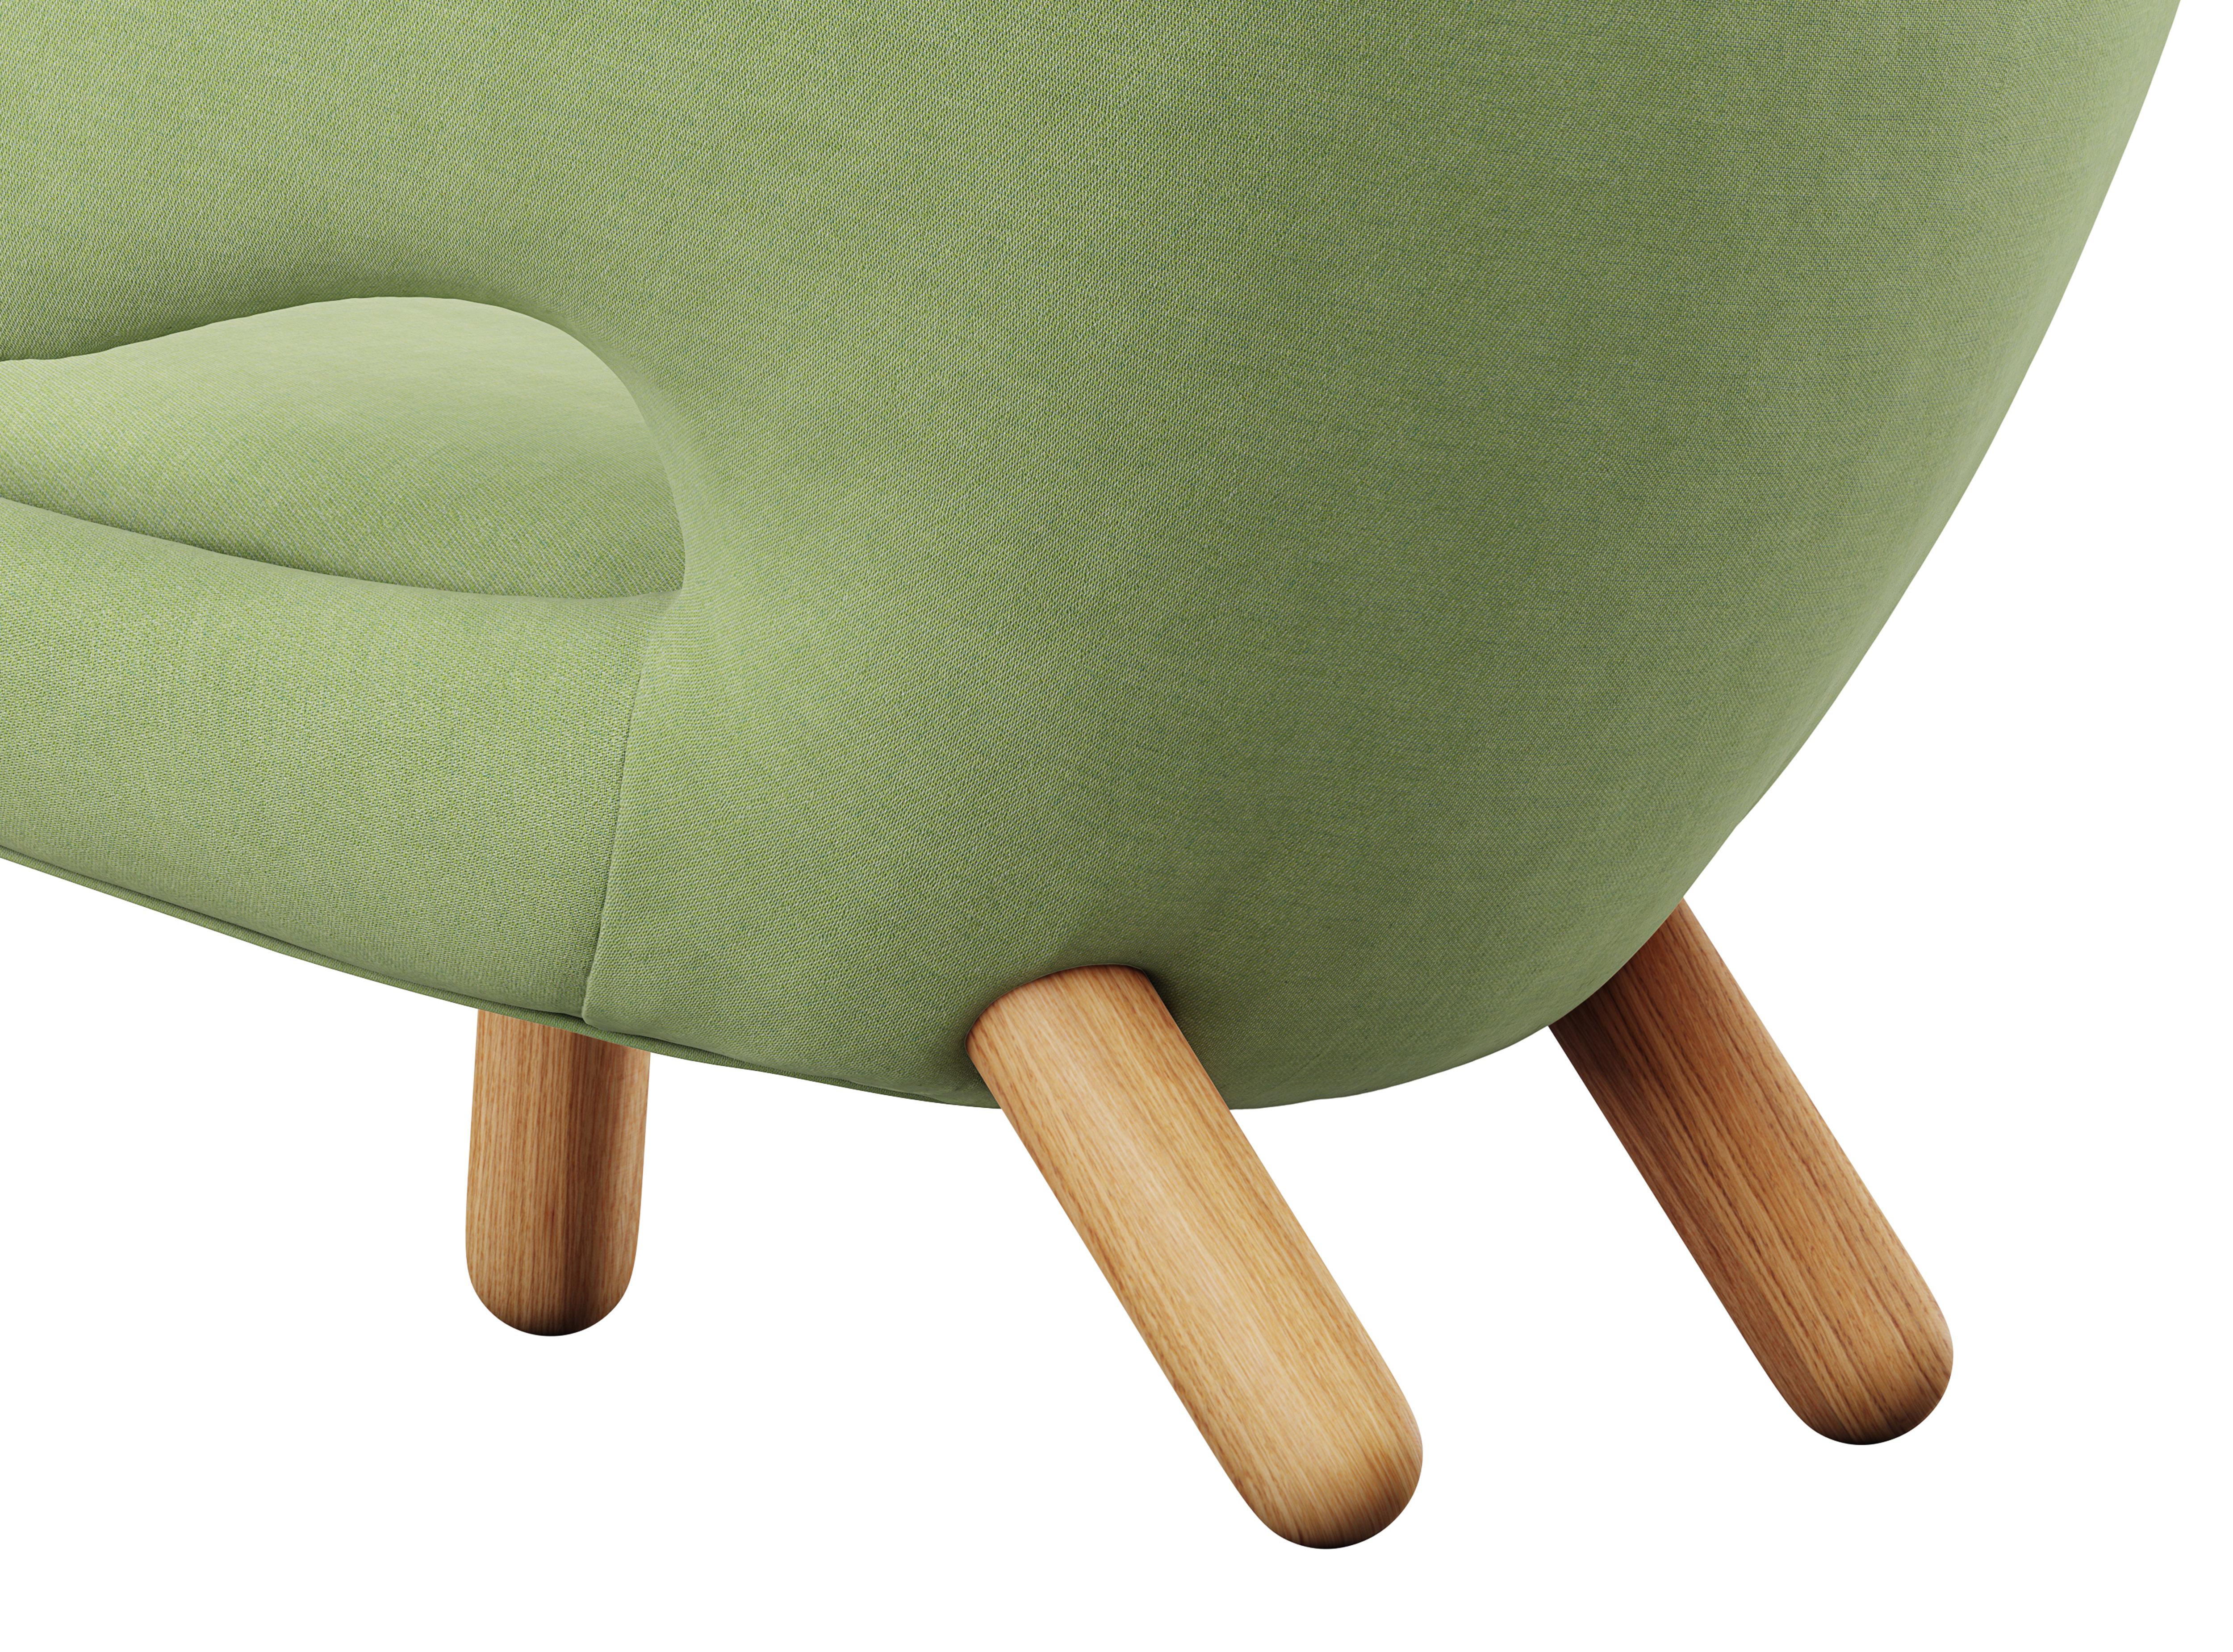 Finn Juhl Pelican Chair Upholstered in Wood and Fabric 2